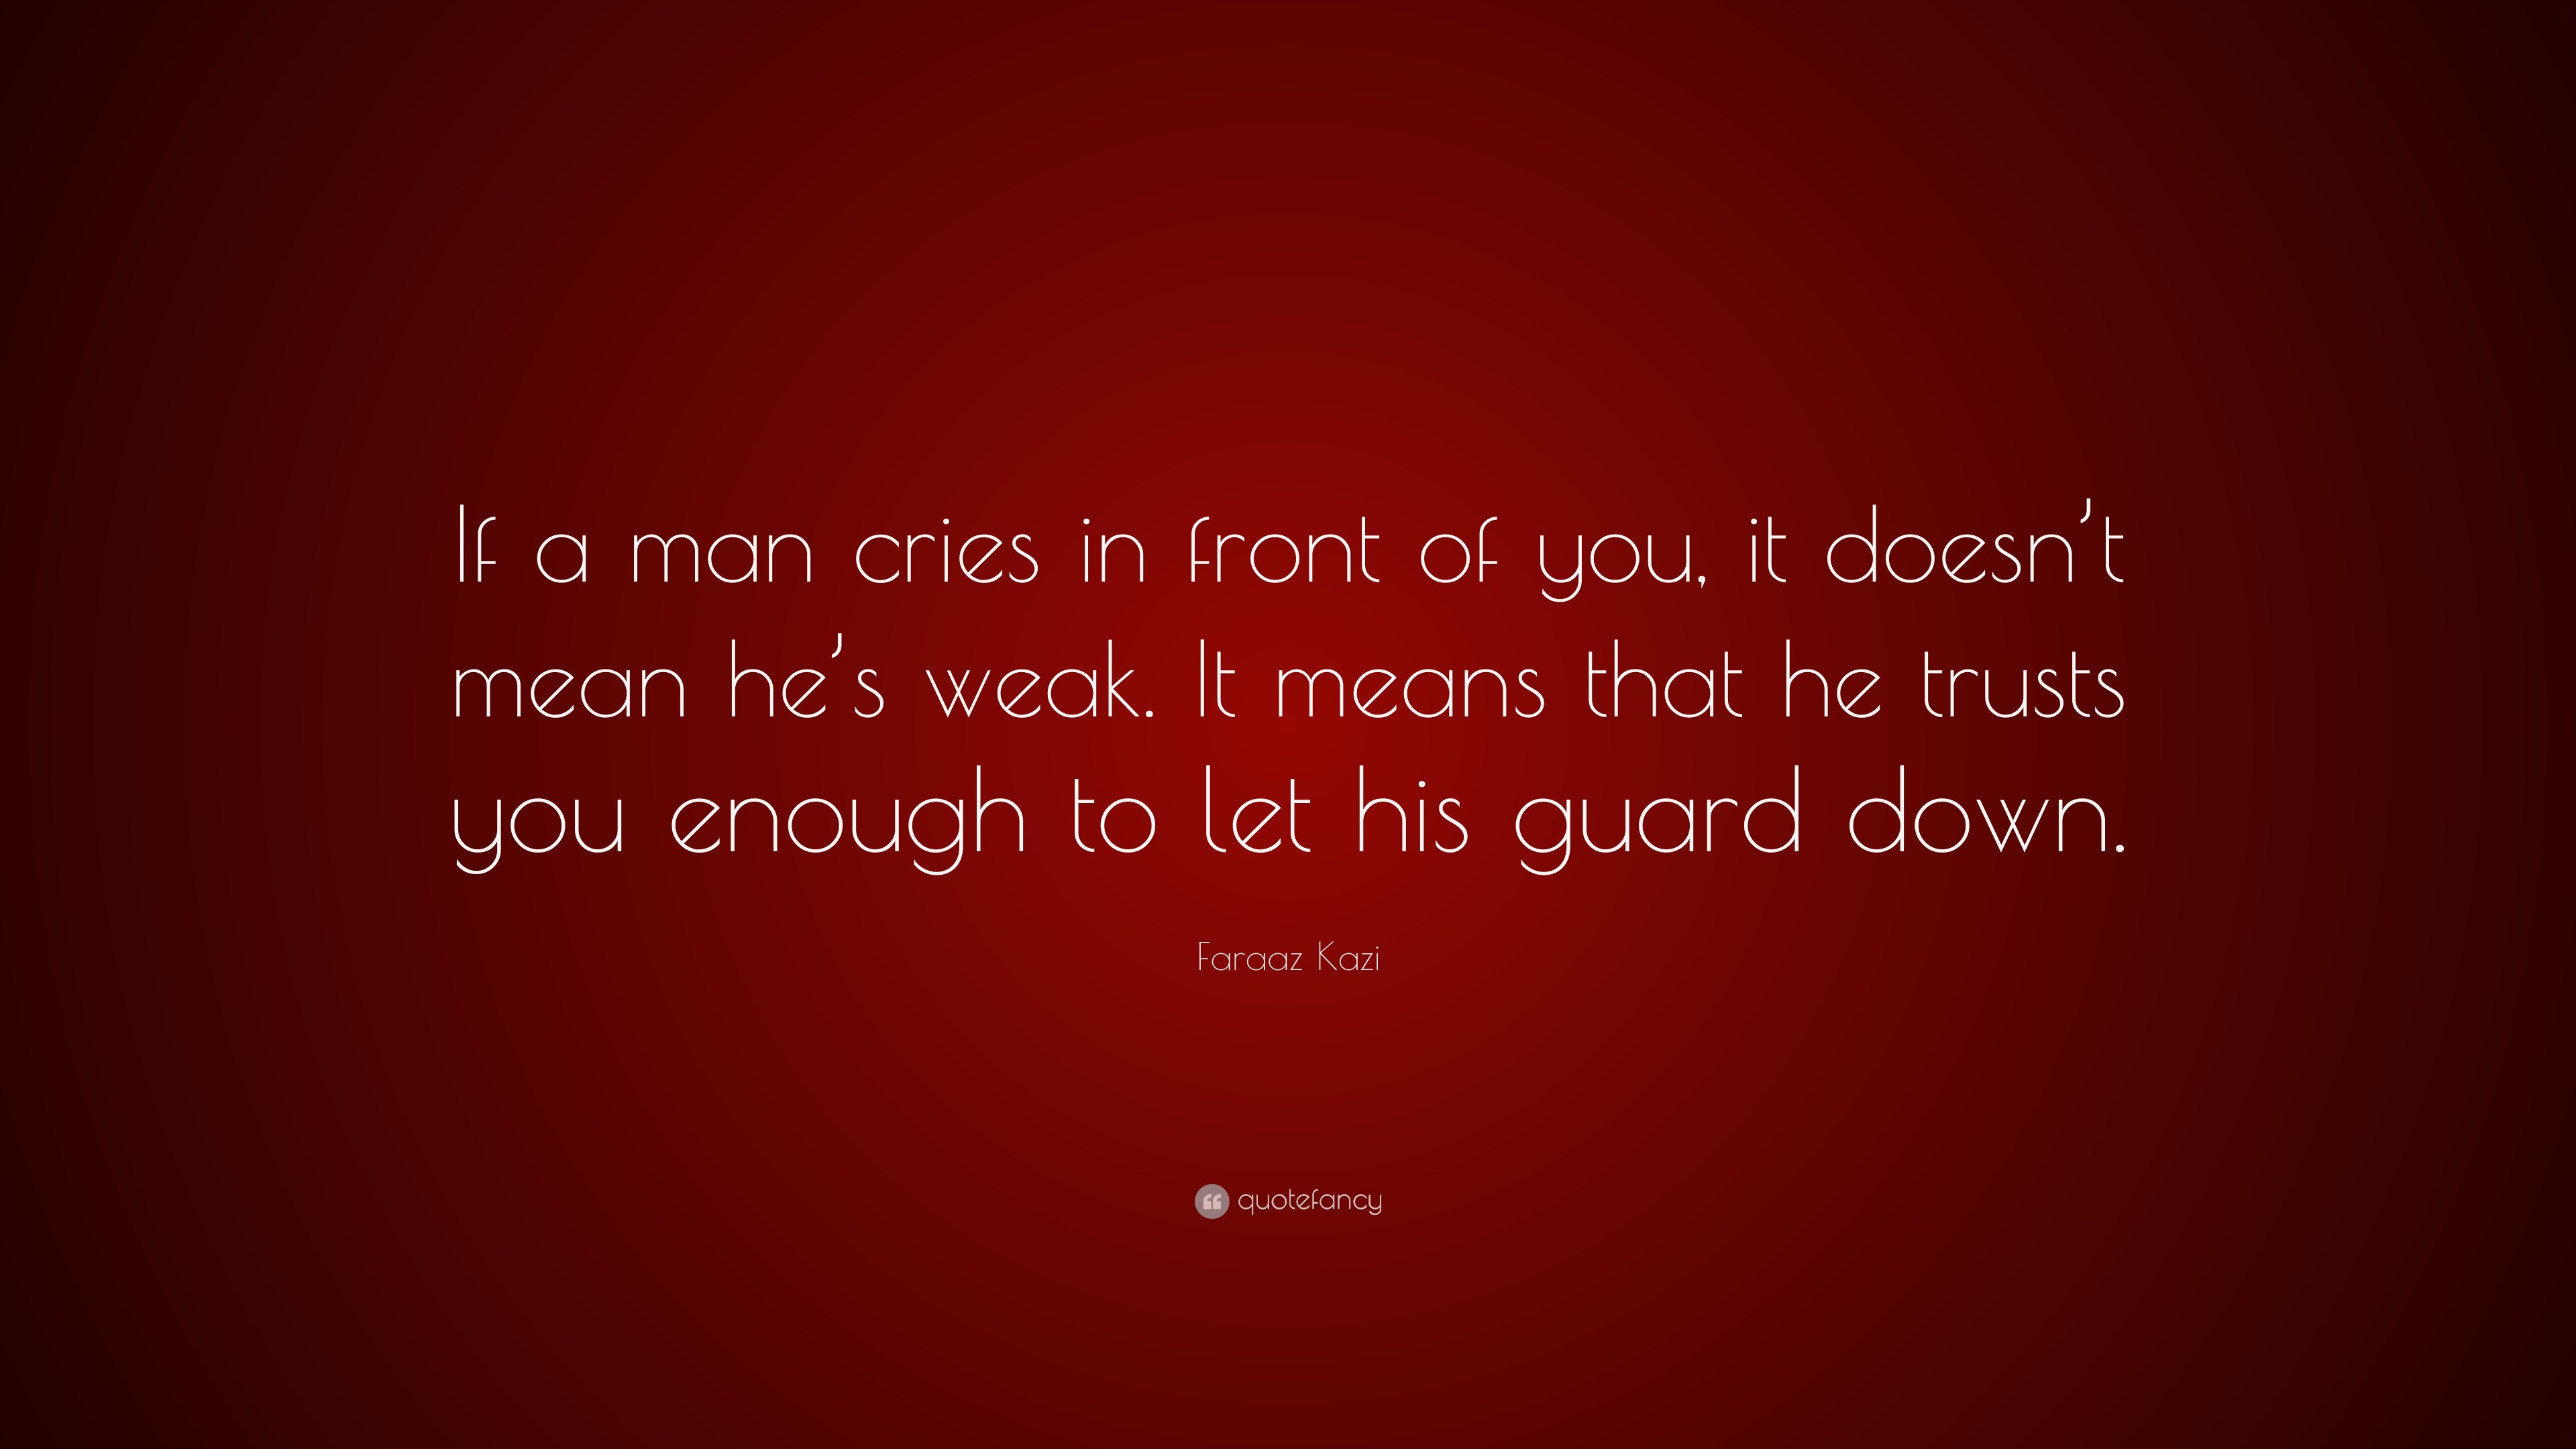 Faraaz Kazi Quote: “If a man cries in front of you, it doesn't